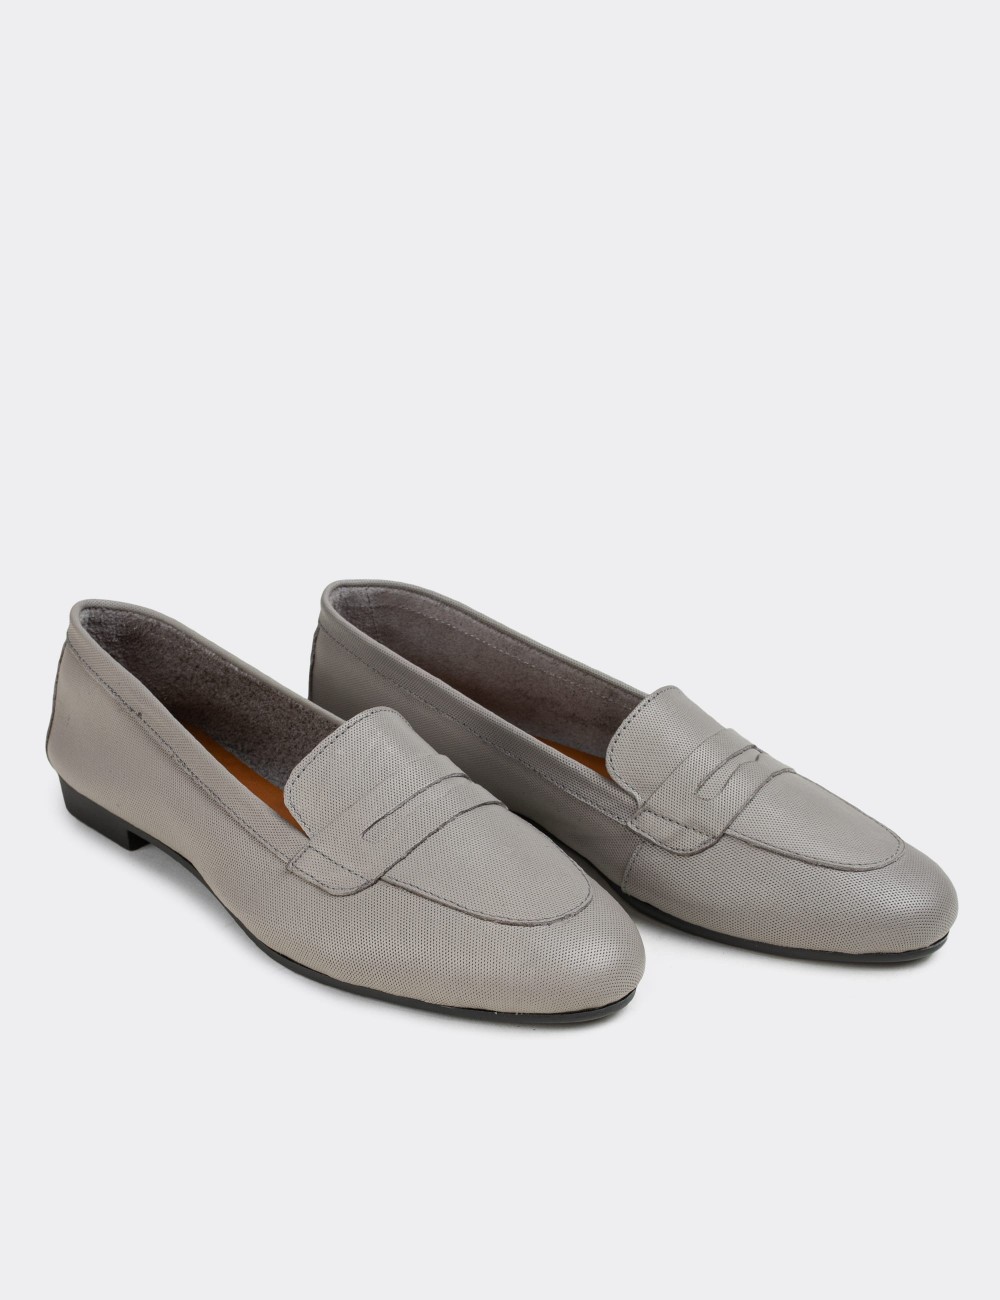 Gray  Leather Loafers Shoes - E3202ZGRIC03